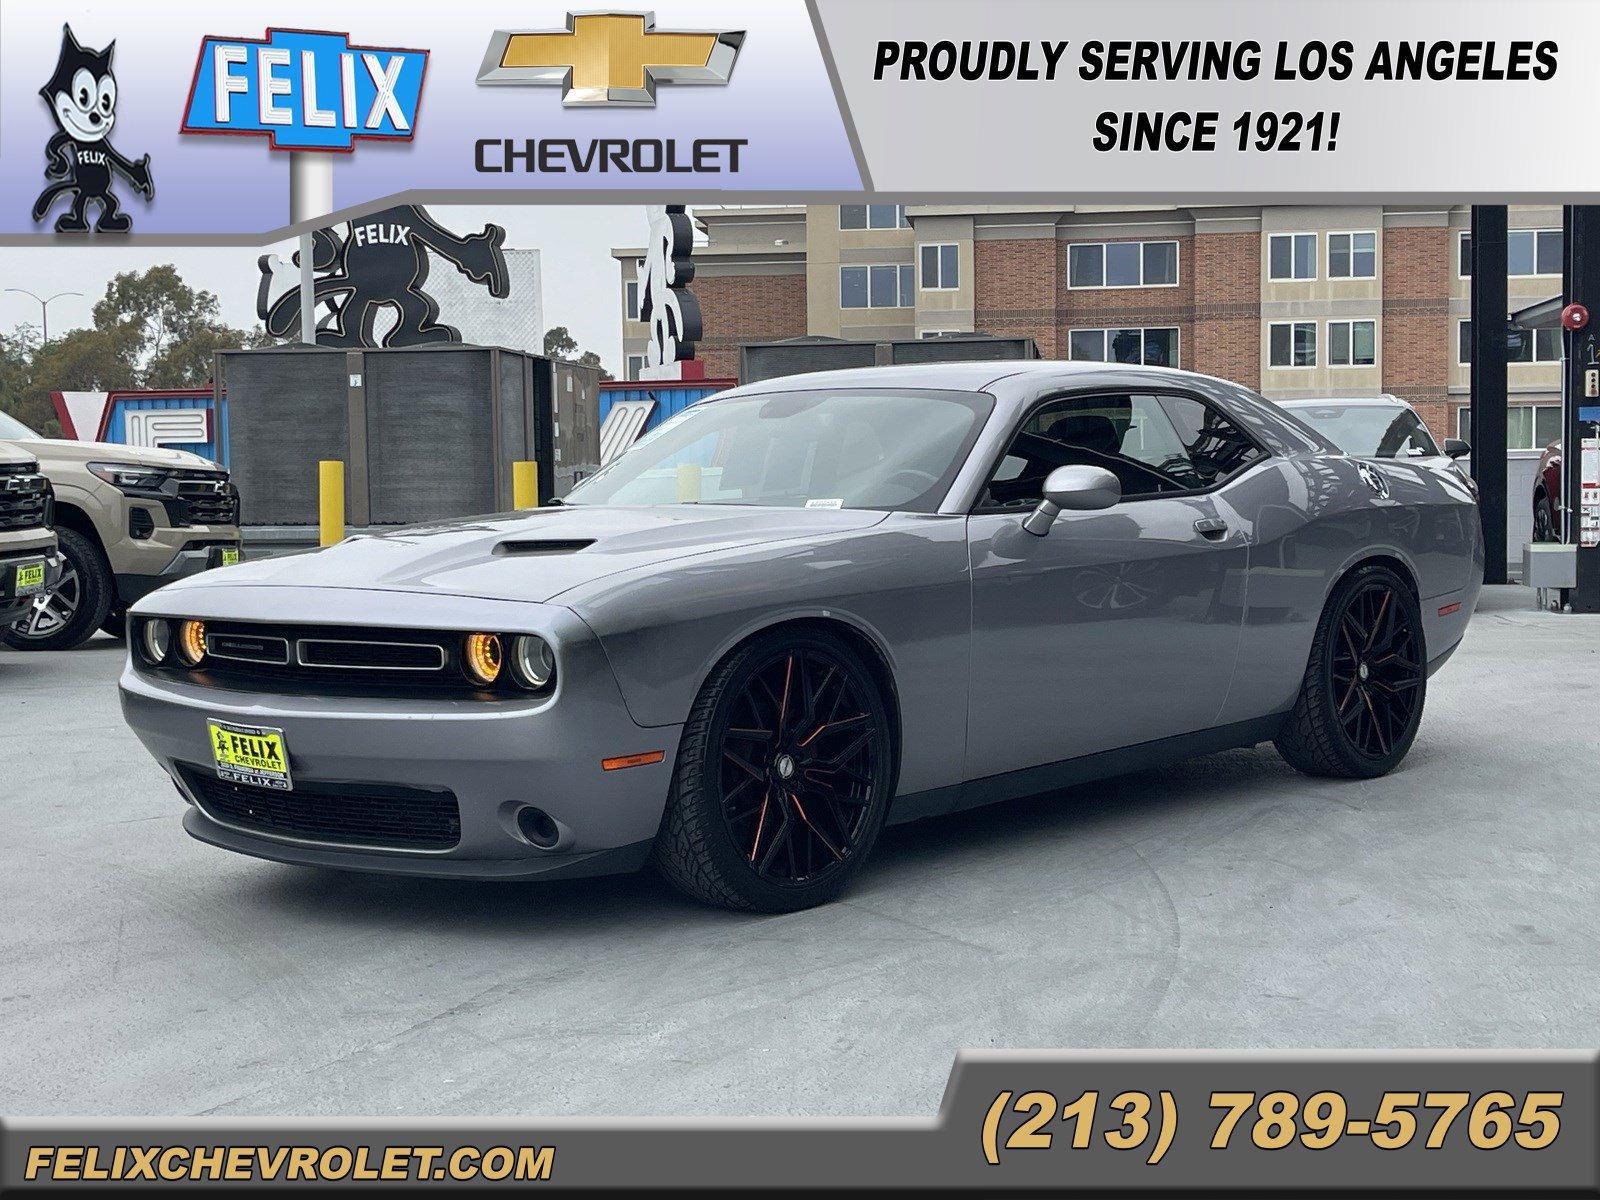 2015 Dodge Challenger Vehicle Photo in LOS ANGELES, CA 90007-3794